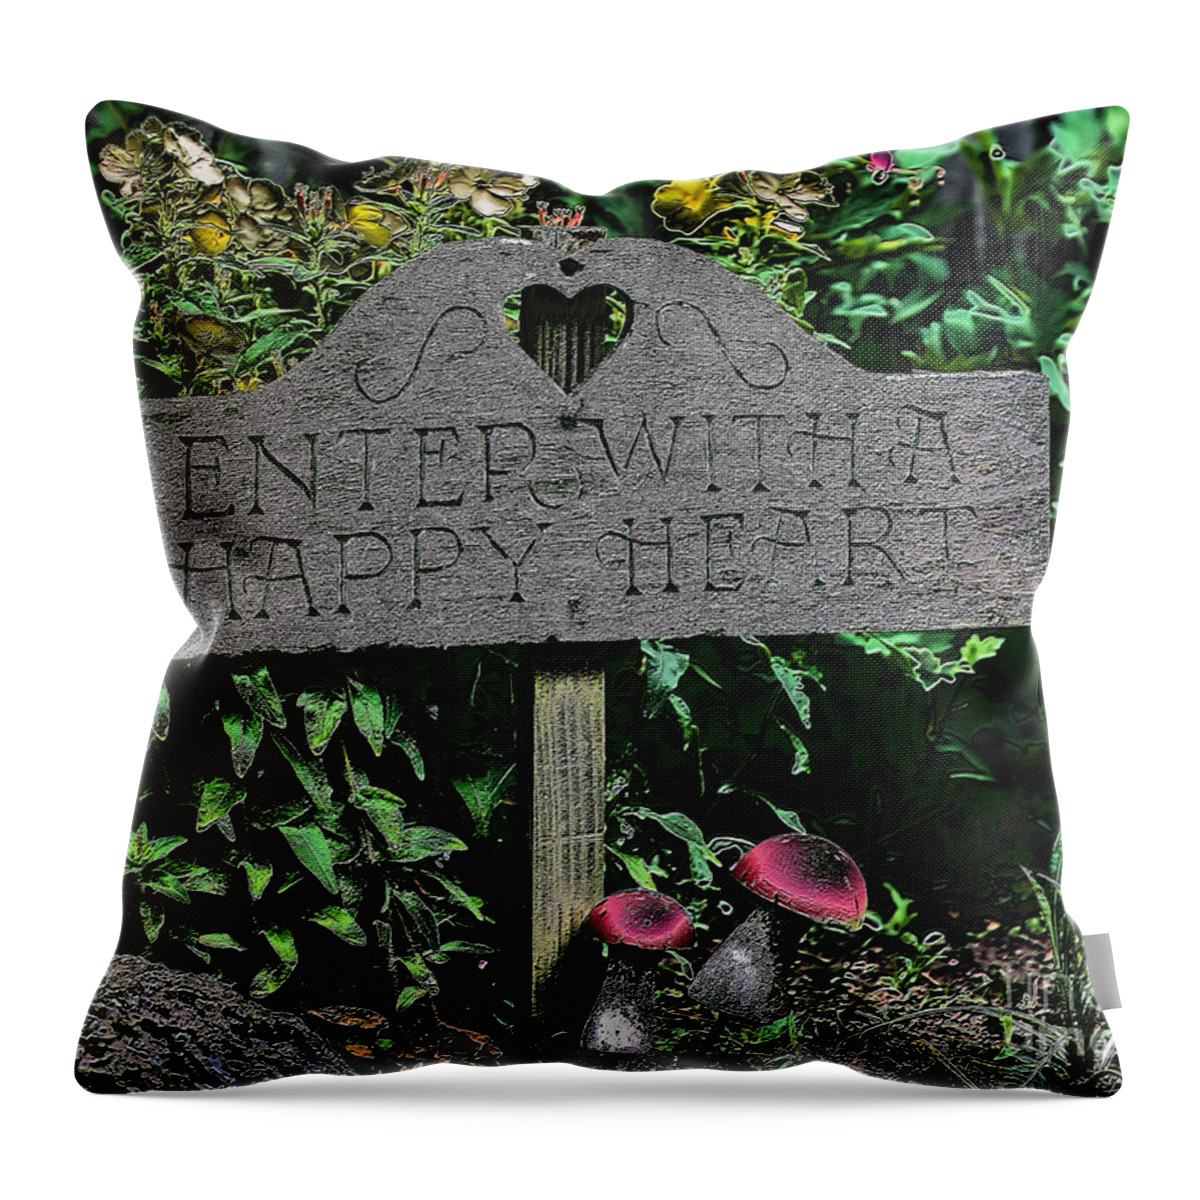 Flower Throw Pillow featuring the digital art Happy Heart Garden by Smilin Eyes Treasures